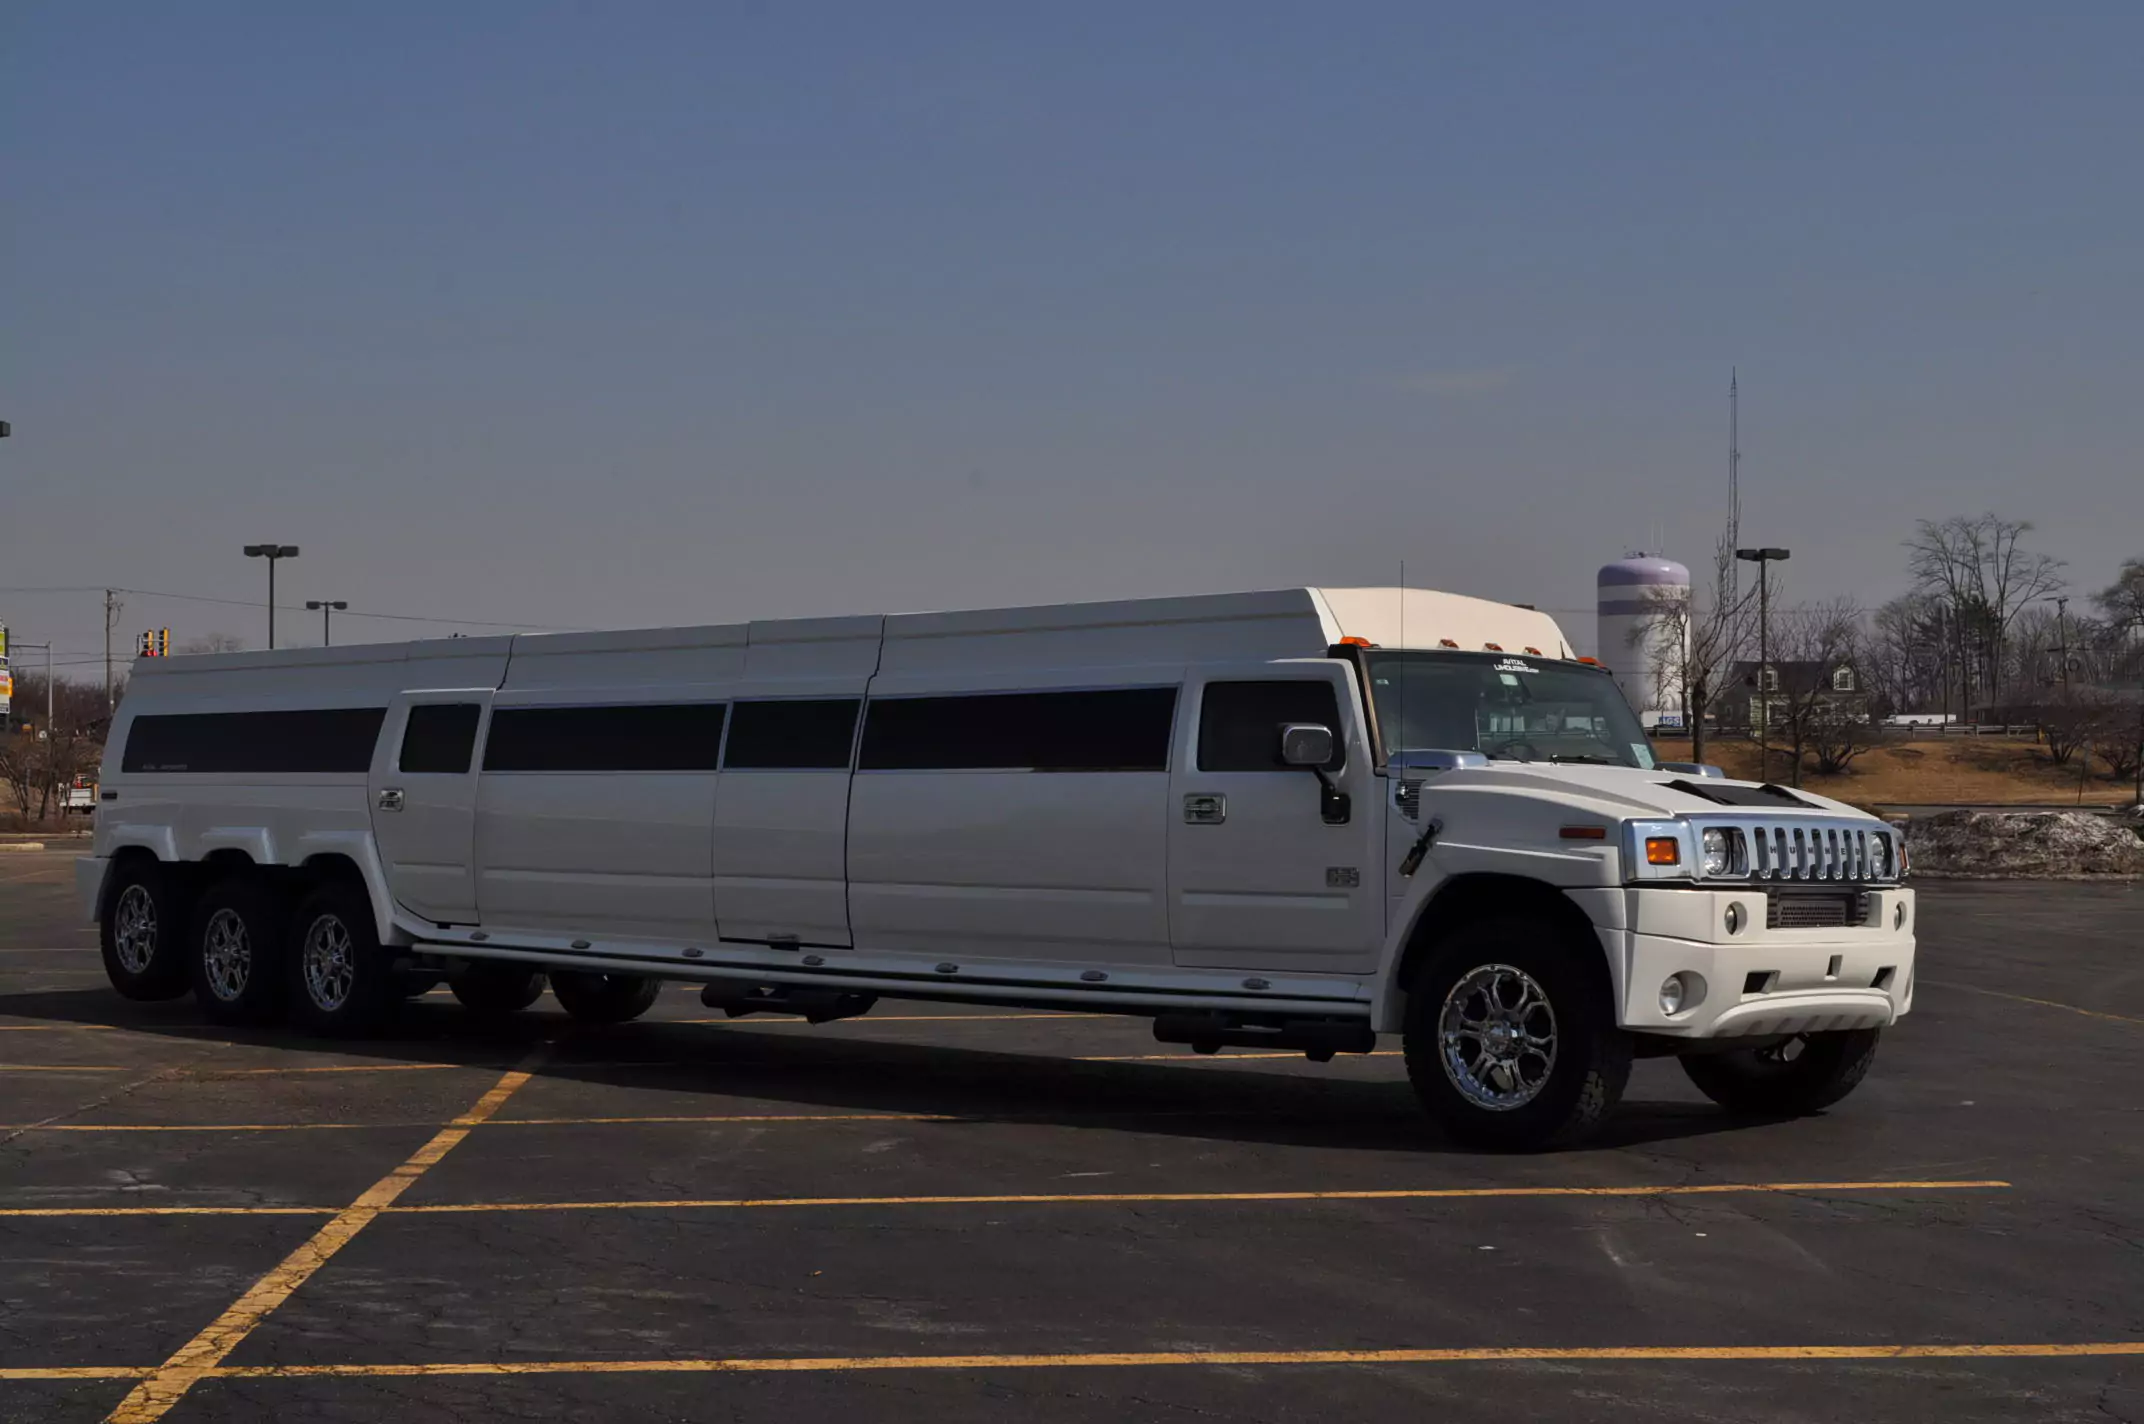 ᑕ❶ᑐ Chicago Limo (30 Passengers) - Hummer H2 Triple Axle for Hire